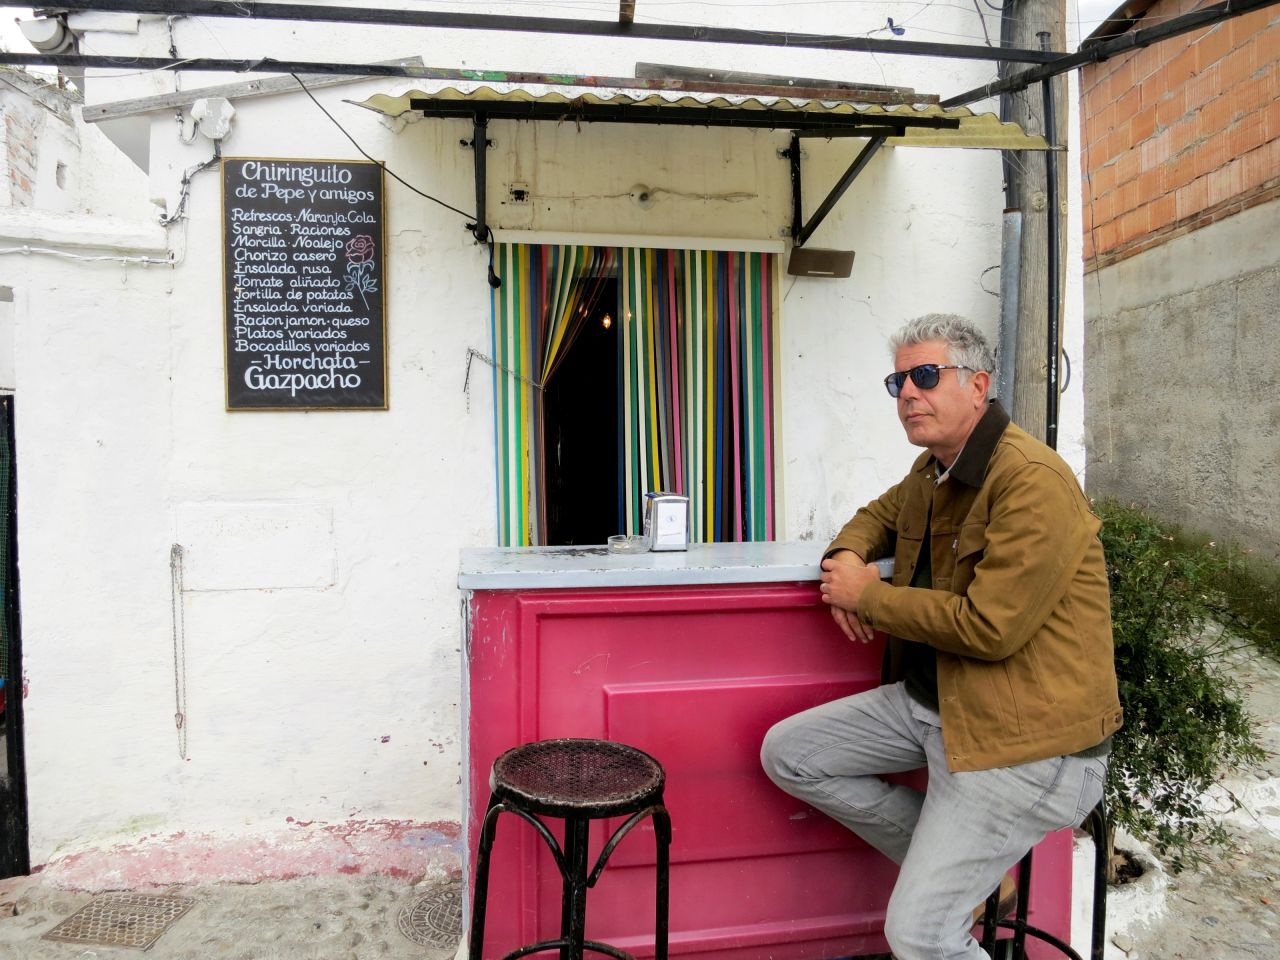 Anthony Bourdain awaits service outside of a cafe featuring traditional Spanish cuisine including gazpacho, ham, cheese and the iconic tortilla: an open-faced potato omelet.